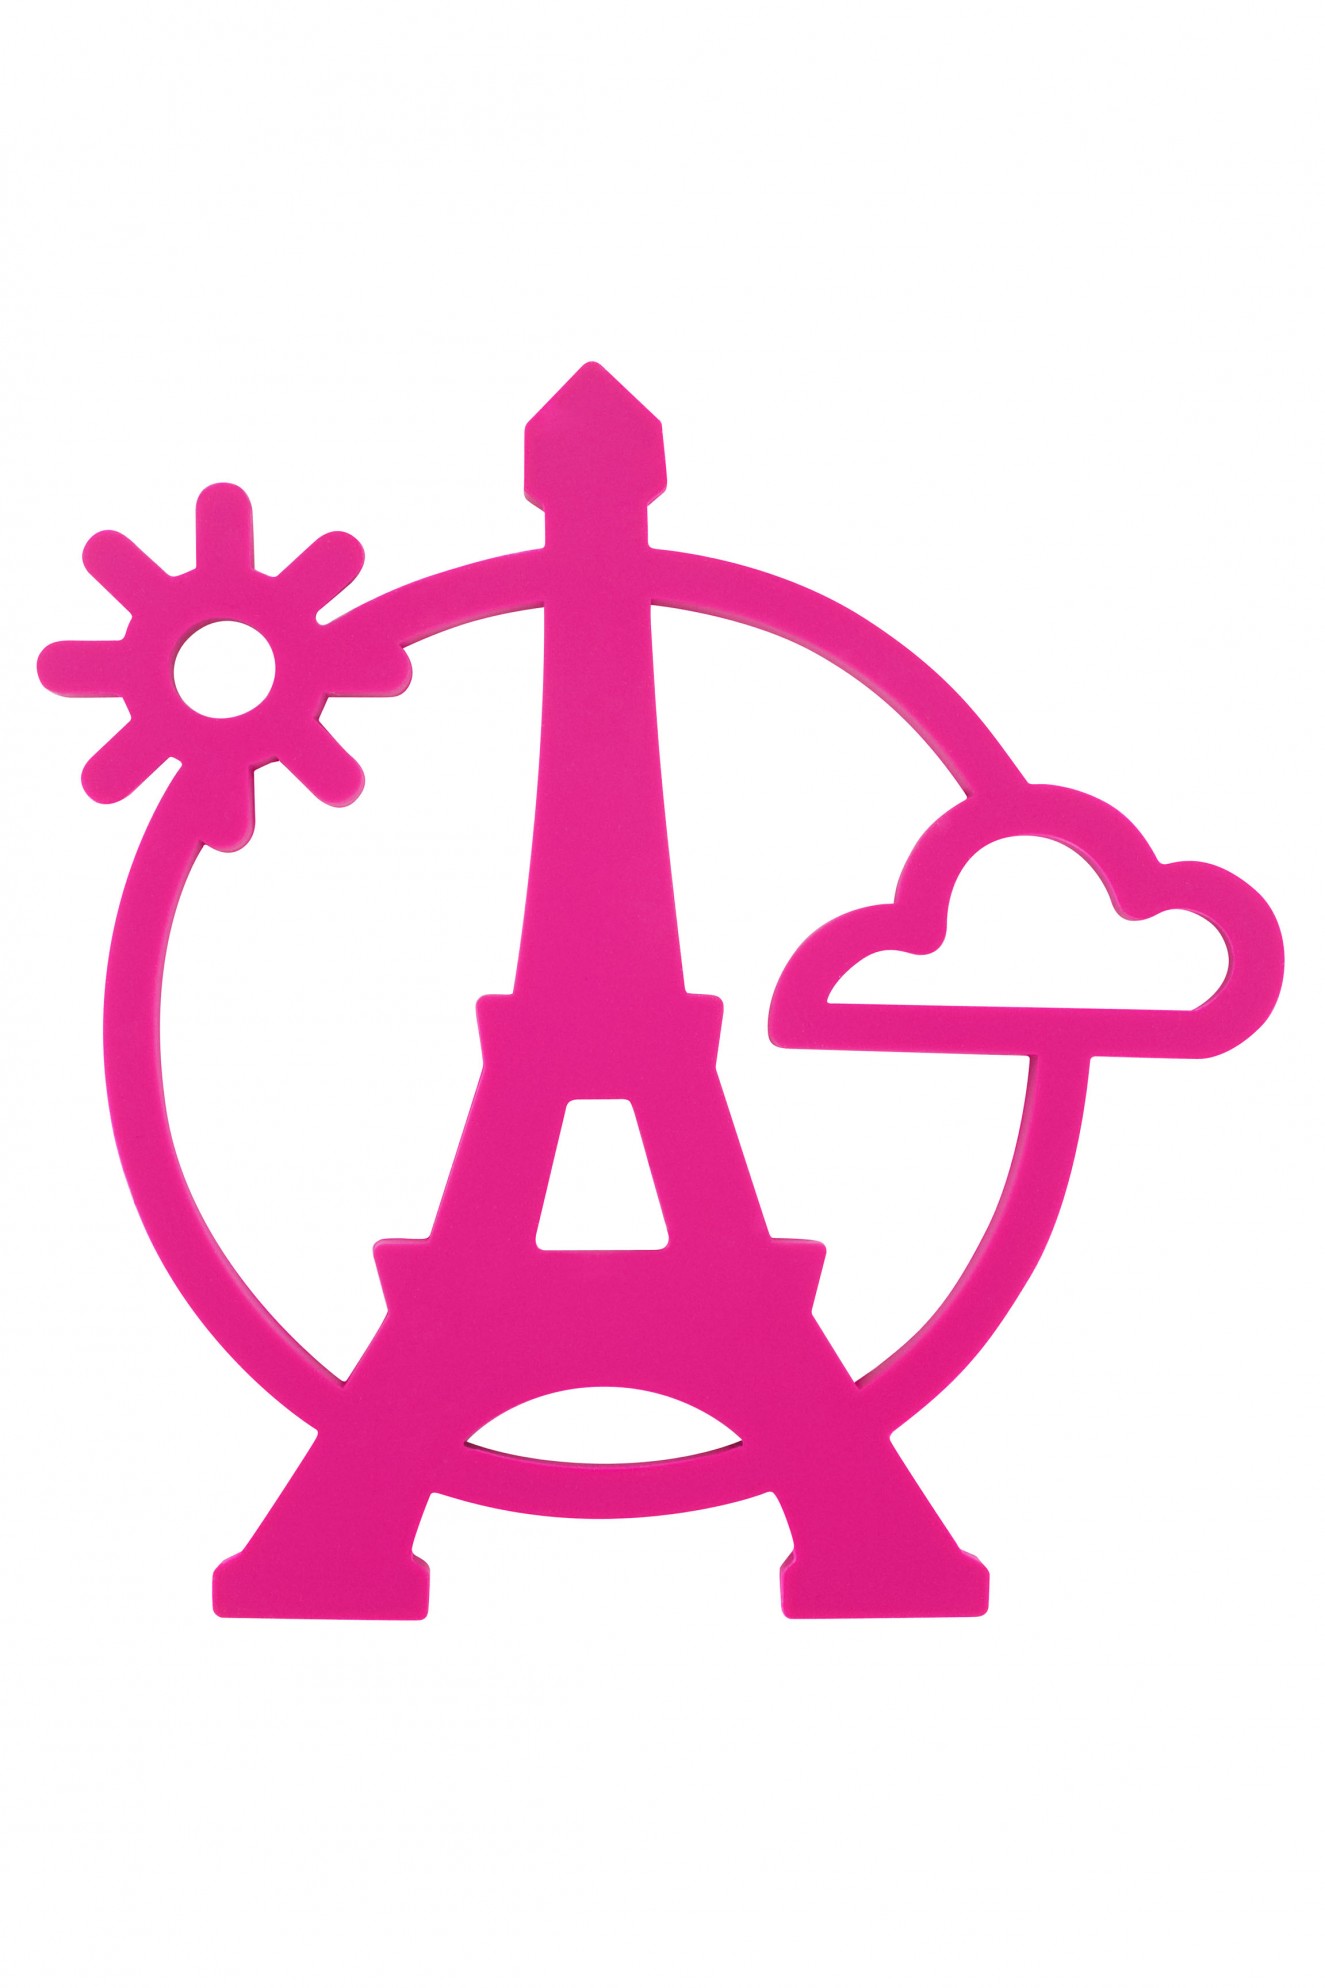 15 Eiffel Tower Pink Wallpaper Free Cliparts That You Can Download To